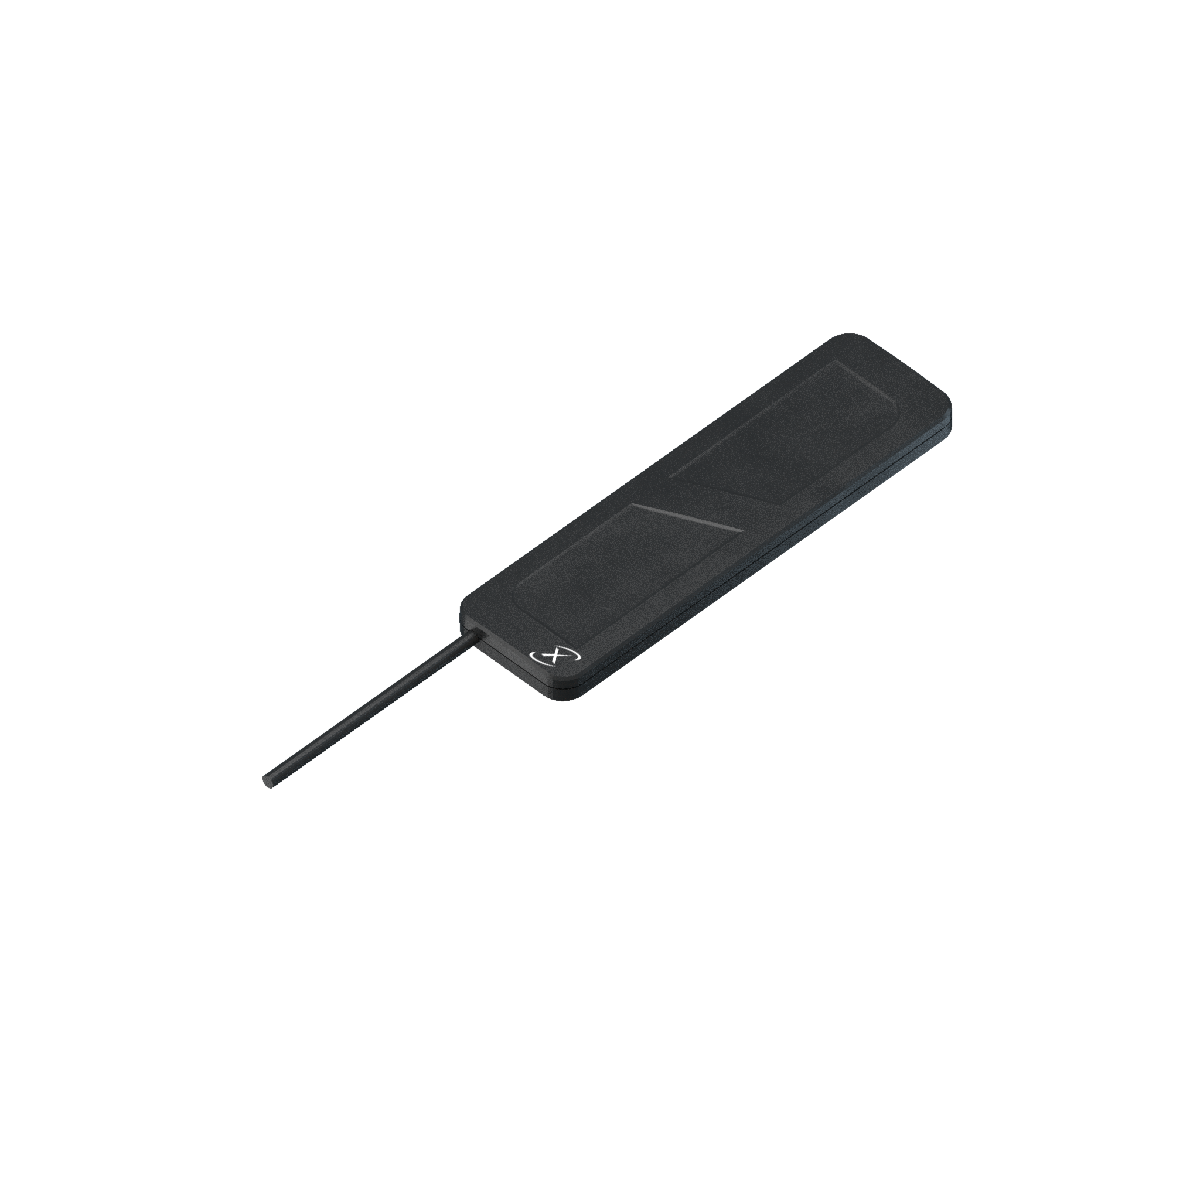 Low Profile LTE Antenna 2G/3G AND 4G CELLULAR  